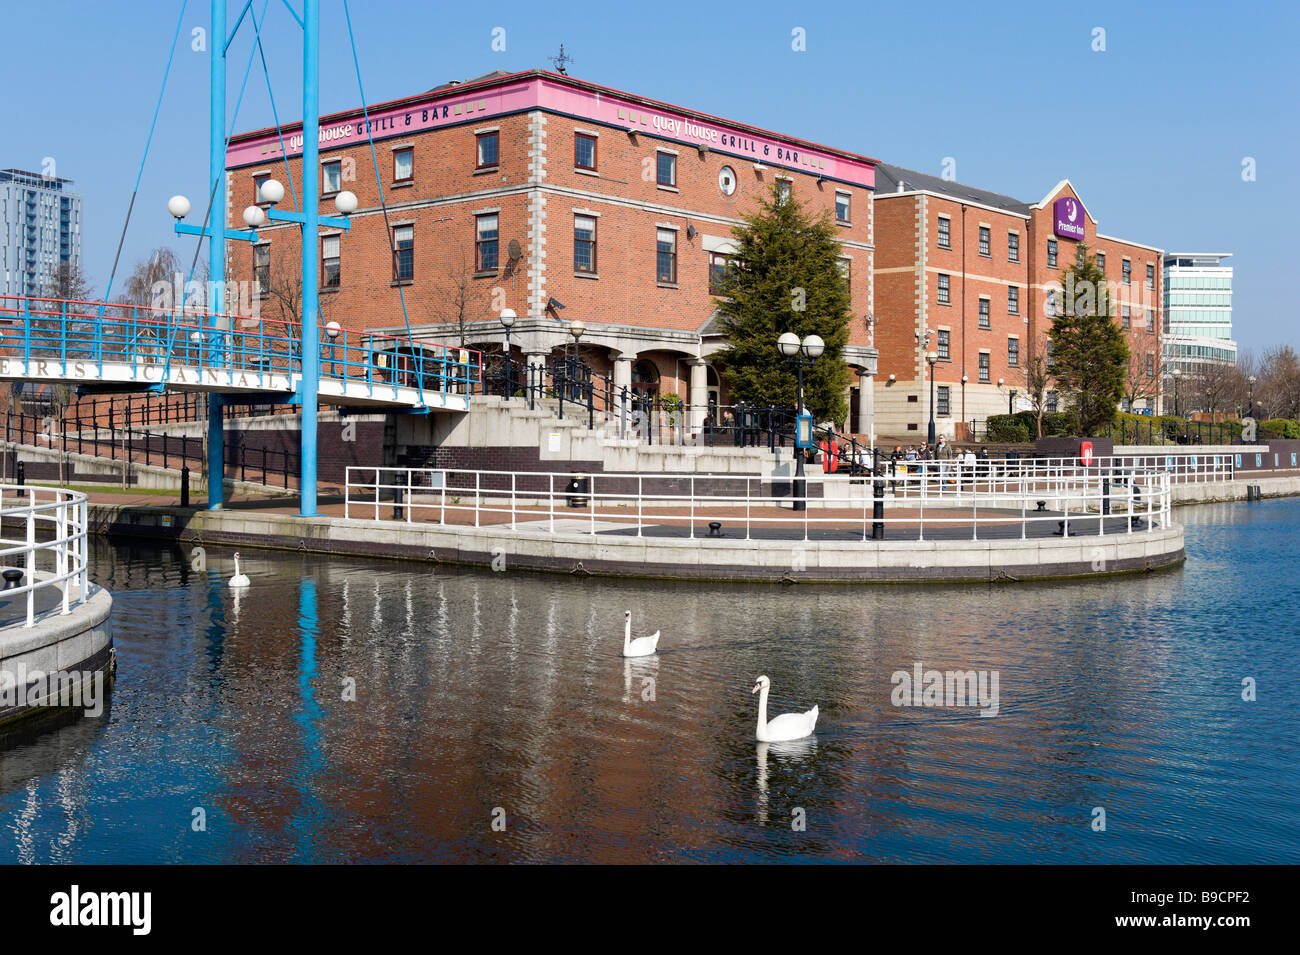 Quay House Grill and Bar and the Premier Inn on the Ontario Basin, Salford Quays, Greater Manchester, England Stock Photo